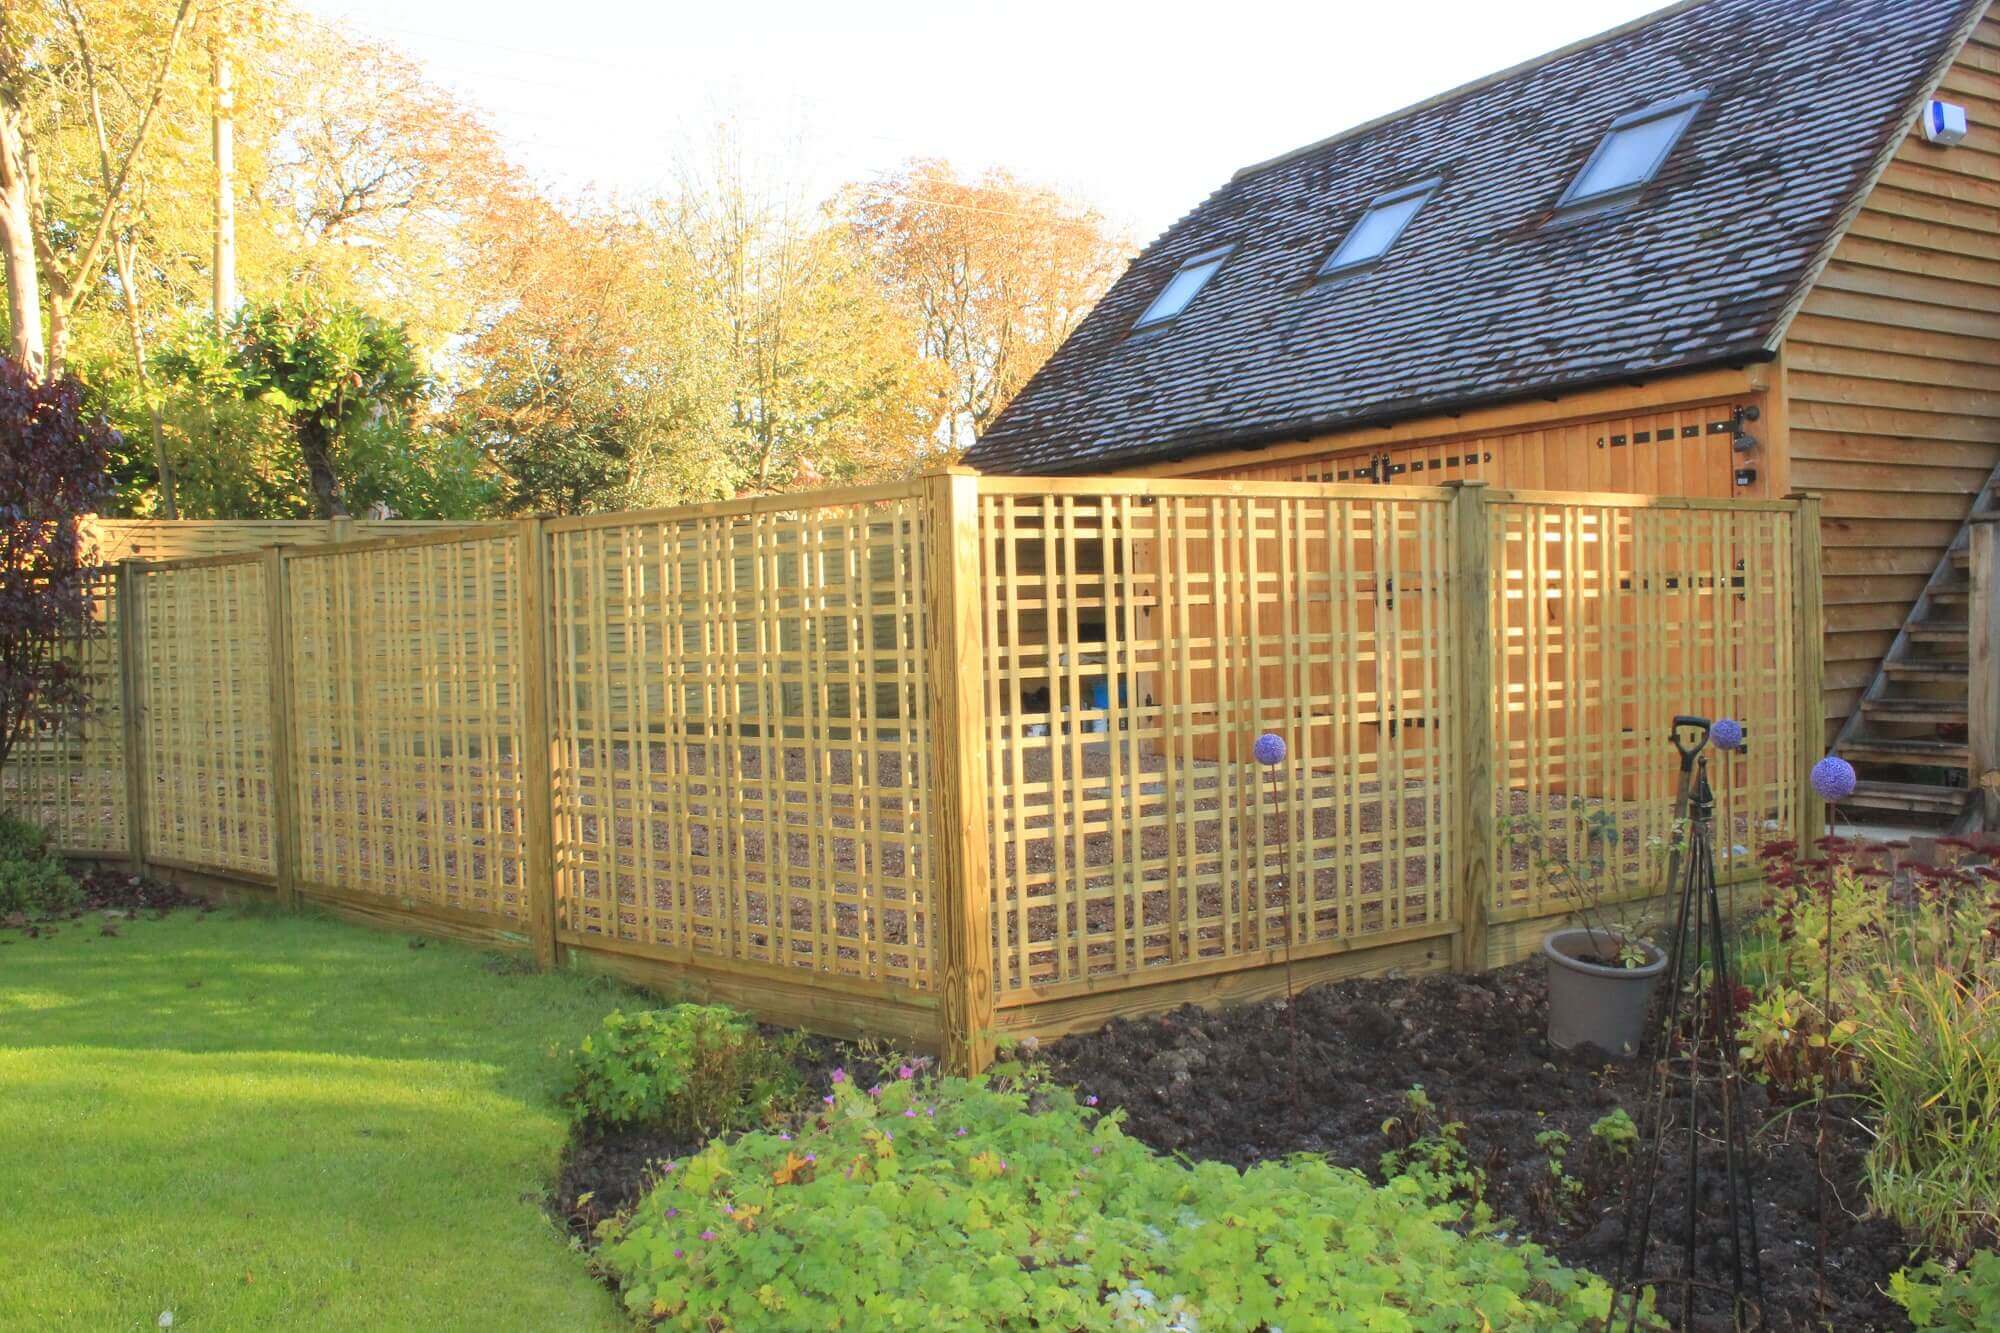 How To Choose A Garden Fence What You Need To Know Jacksons Fencing